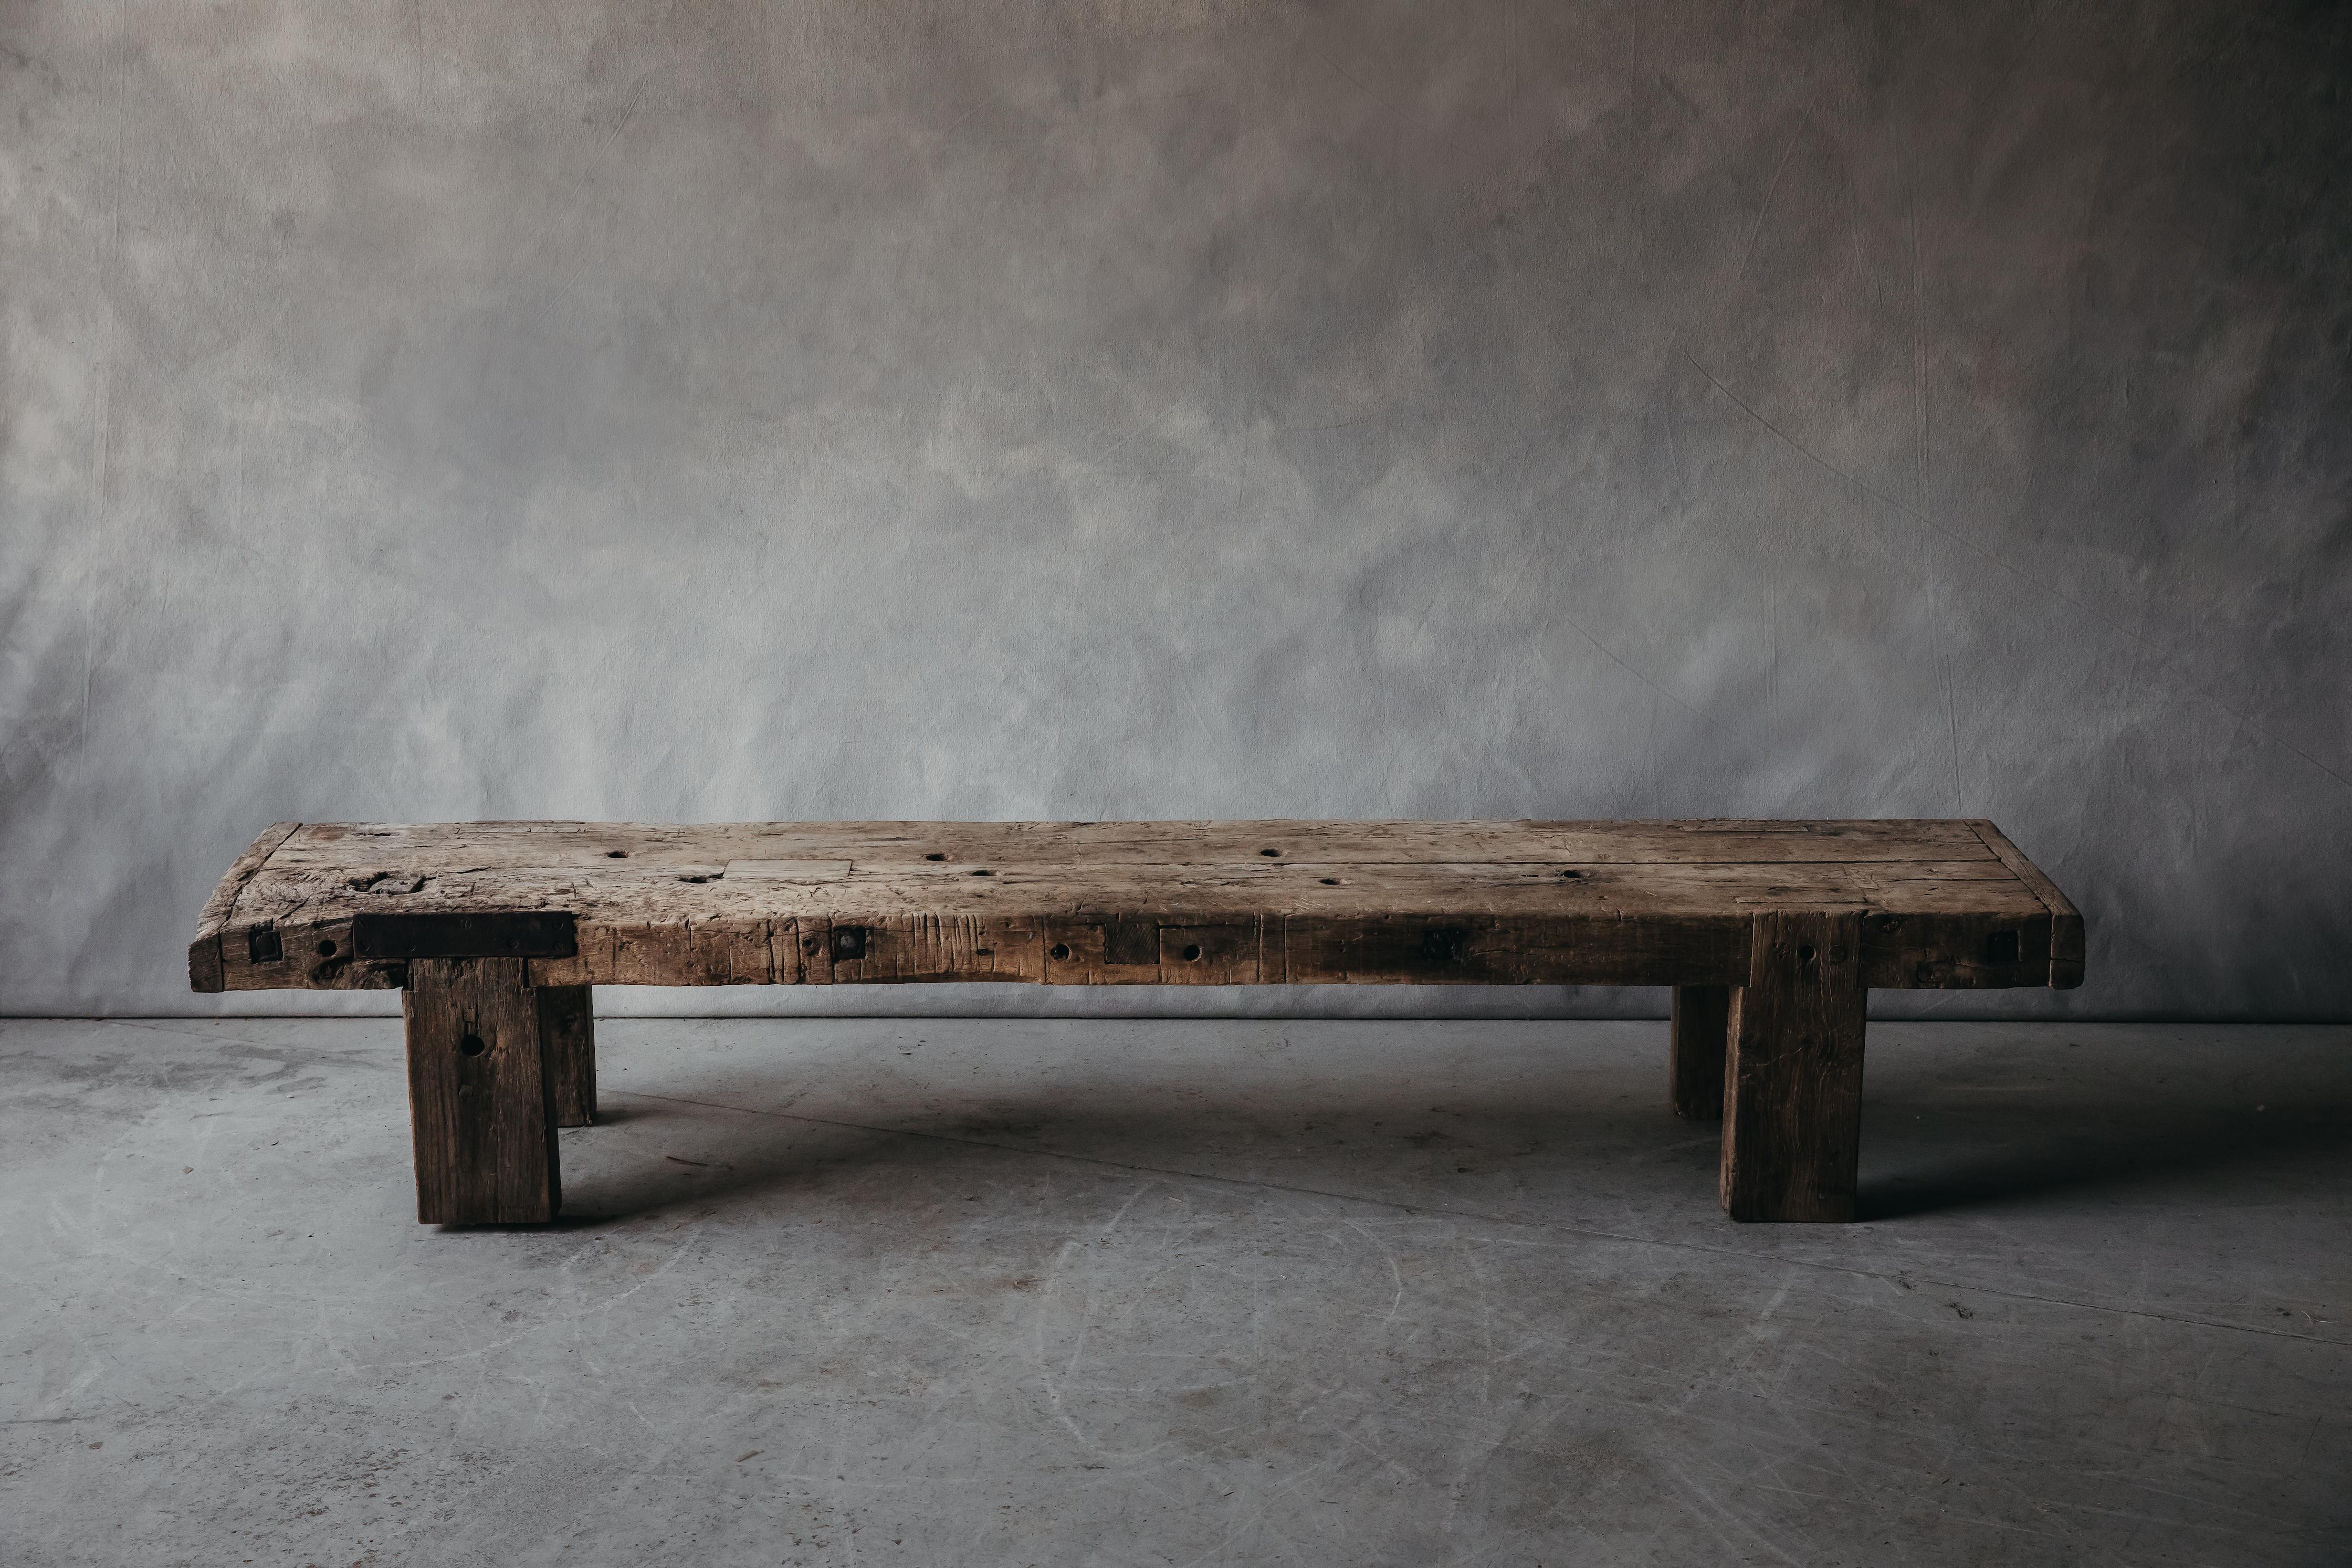 Large Oak Workbench Coffee Table from France, circa 1950. Solid oak construction with great original wear and use.